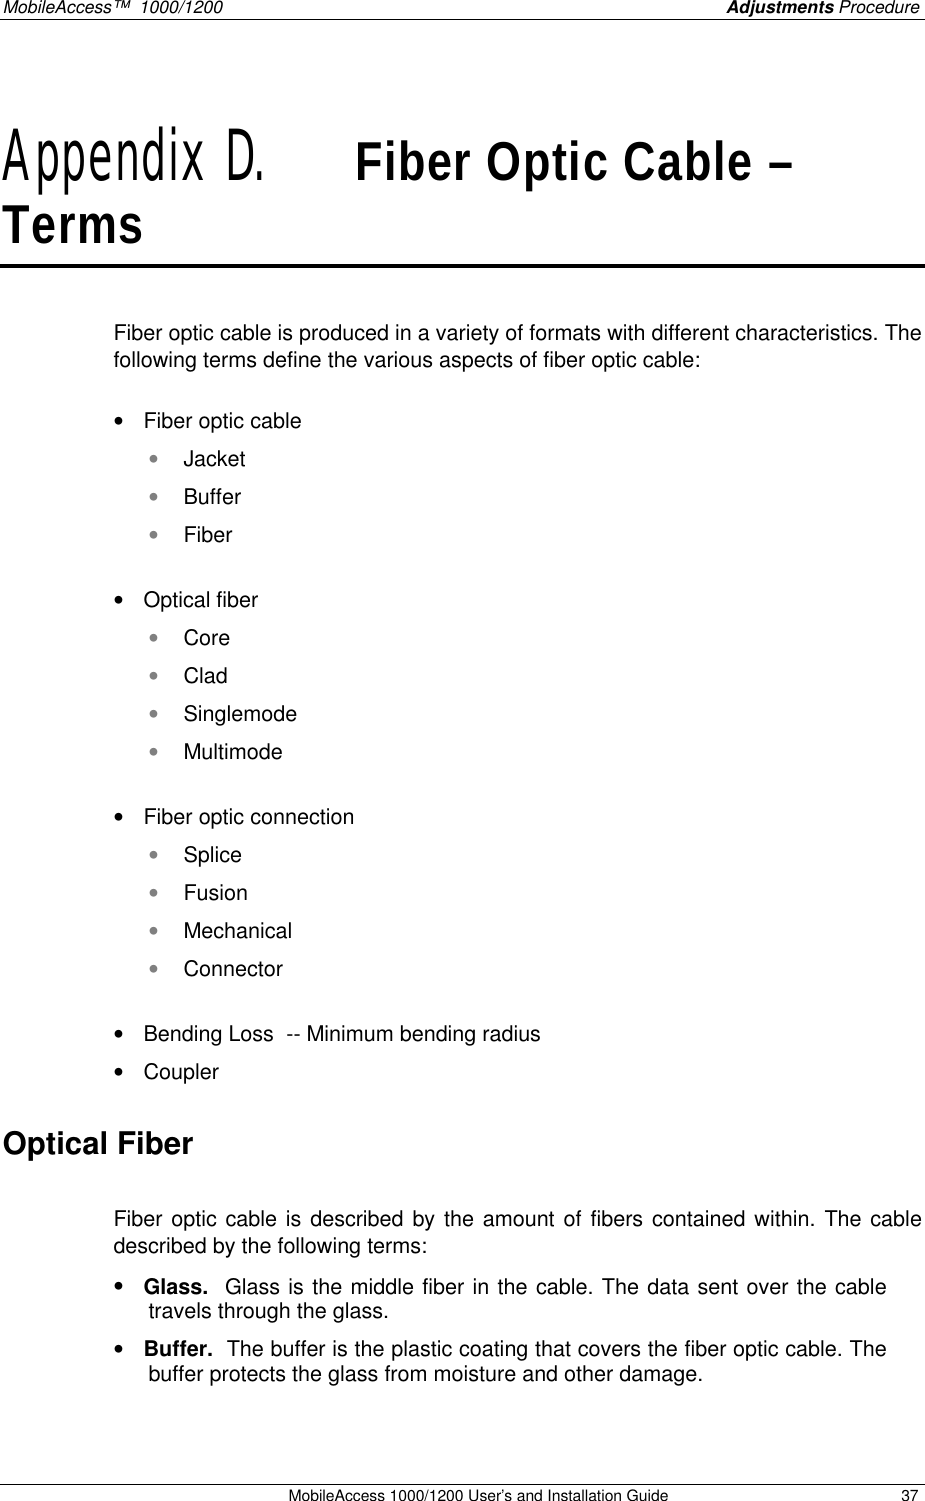 MobileAccess™  1000/1200    Adjustments Procedure  MobileAccess 1000/1200 User’s and Installation Guide 37 Appendix D.   Fiber Optic Cable – Terms   Fiber optic cable is produced in a variety of formats with different characteristics. The following terms define the various aspects of fiber optic cable:  • Fiber optic cable • Jacket • Buffer • Fiber  • Optical fiber • Core  • Clad  • Singlemode • Multimode  • Fiber optic connection • Splice • Fusion • Mechanical • Connector  • Bending Loss  -- Minimum bending radius • Coupler Optical Fiber  Fiber optic cable is described by the amount of fibers contained within. The cable described by the following terms: • Glass.  Glass is the middle fiber in the cable. The data sent over the cable travels through the glass.  • Buffer.  The buffer is the plastic coating that covers the fiber optic cable. The buffer protects the glass from moisture and other damage. 